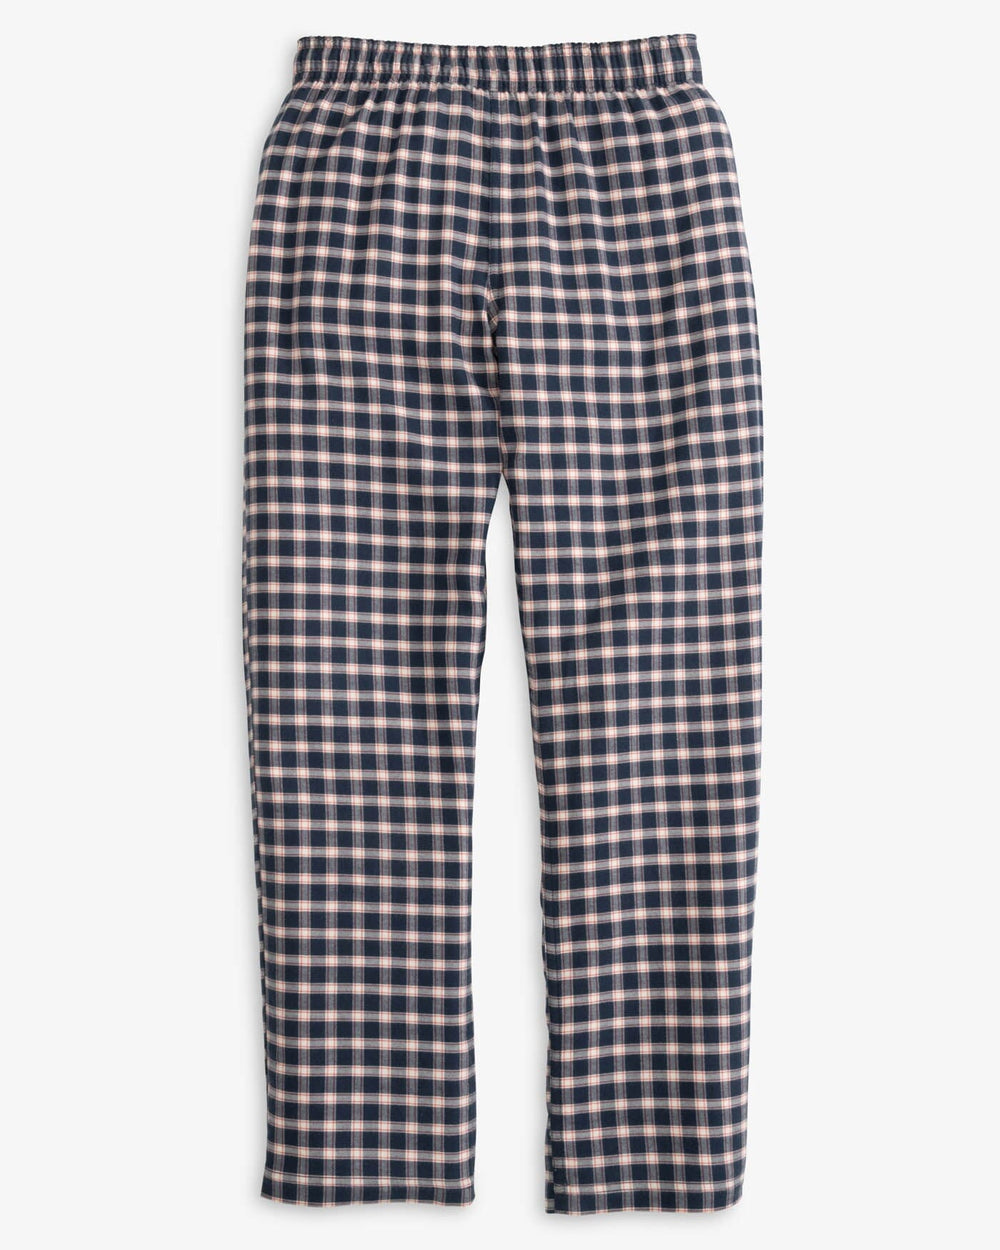 The front view of the Southern Tide Youth Silverleaf Plaid Lounge Pant by Southern Tide - Dress Blue